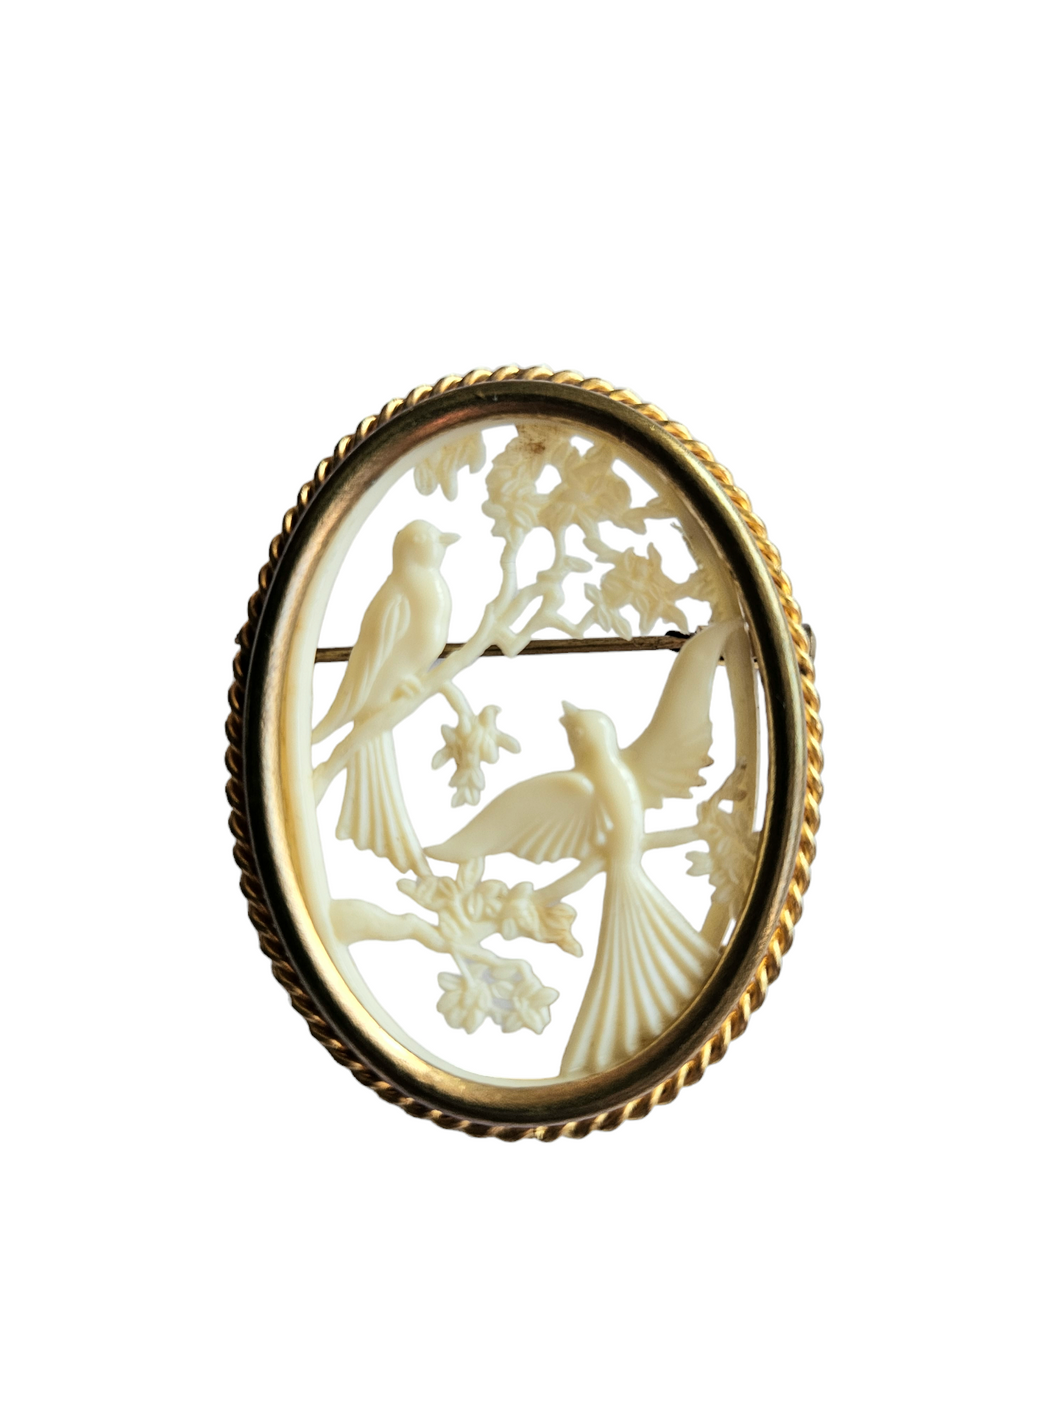 1930s French Turtle Doves? Celluloid Brooch